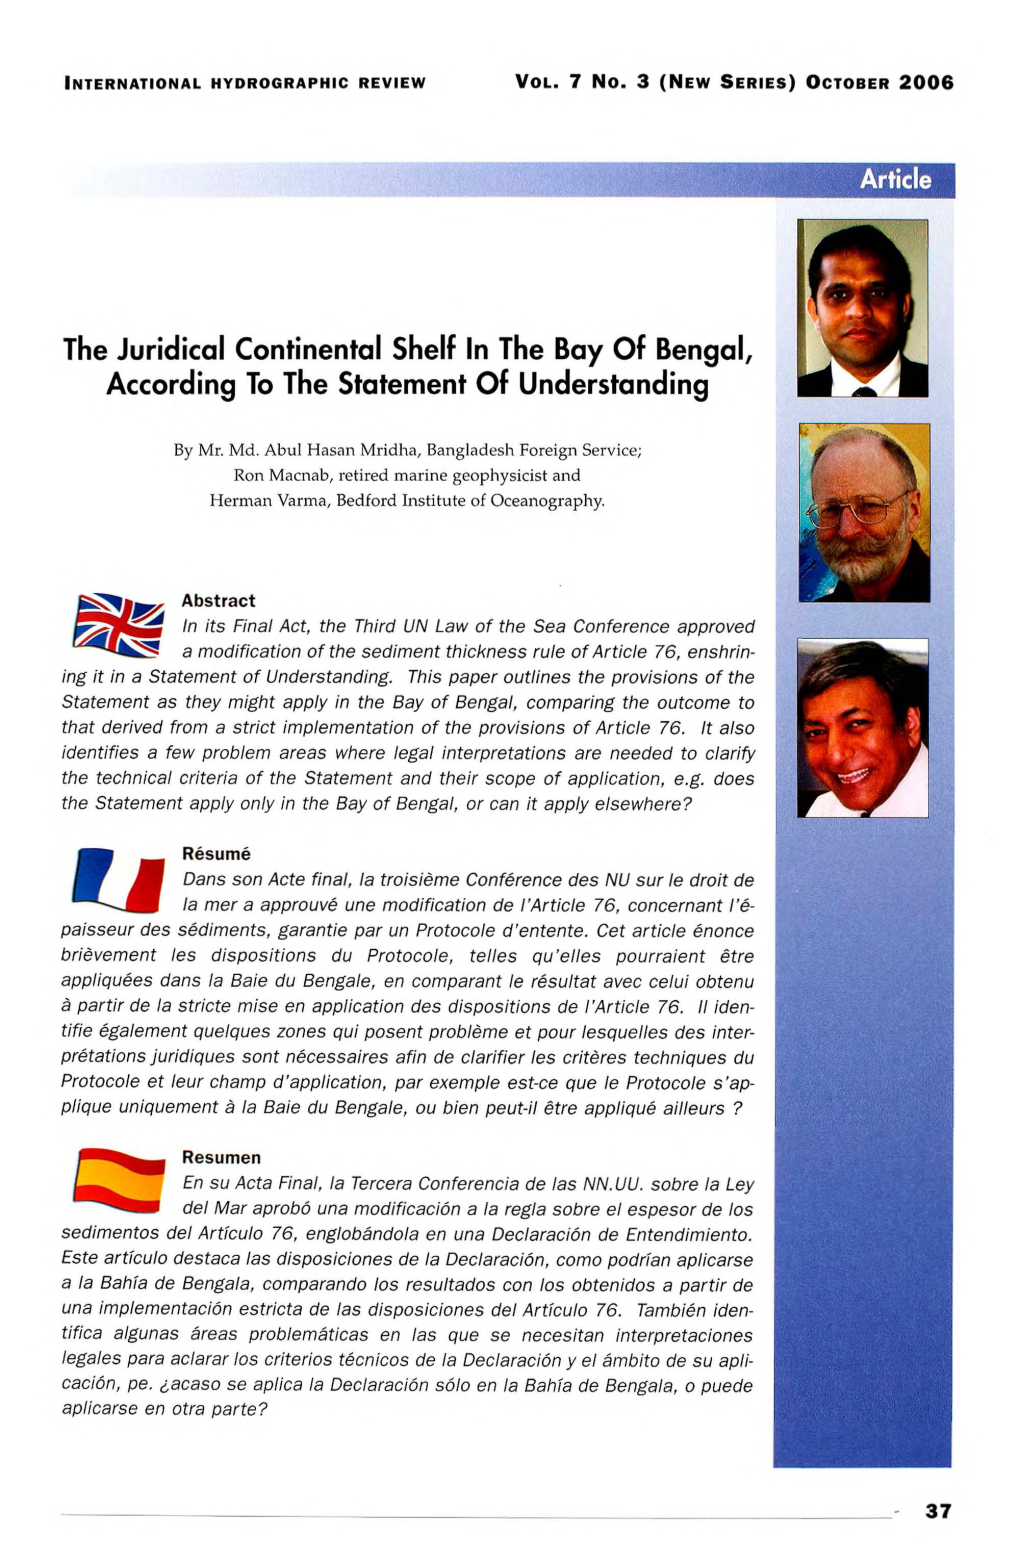 The Juridical Continental Shelf in the Bay of Bengal According to the Statement of Understanding |